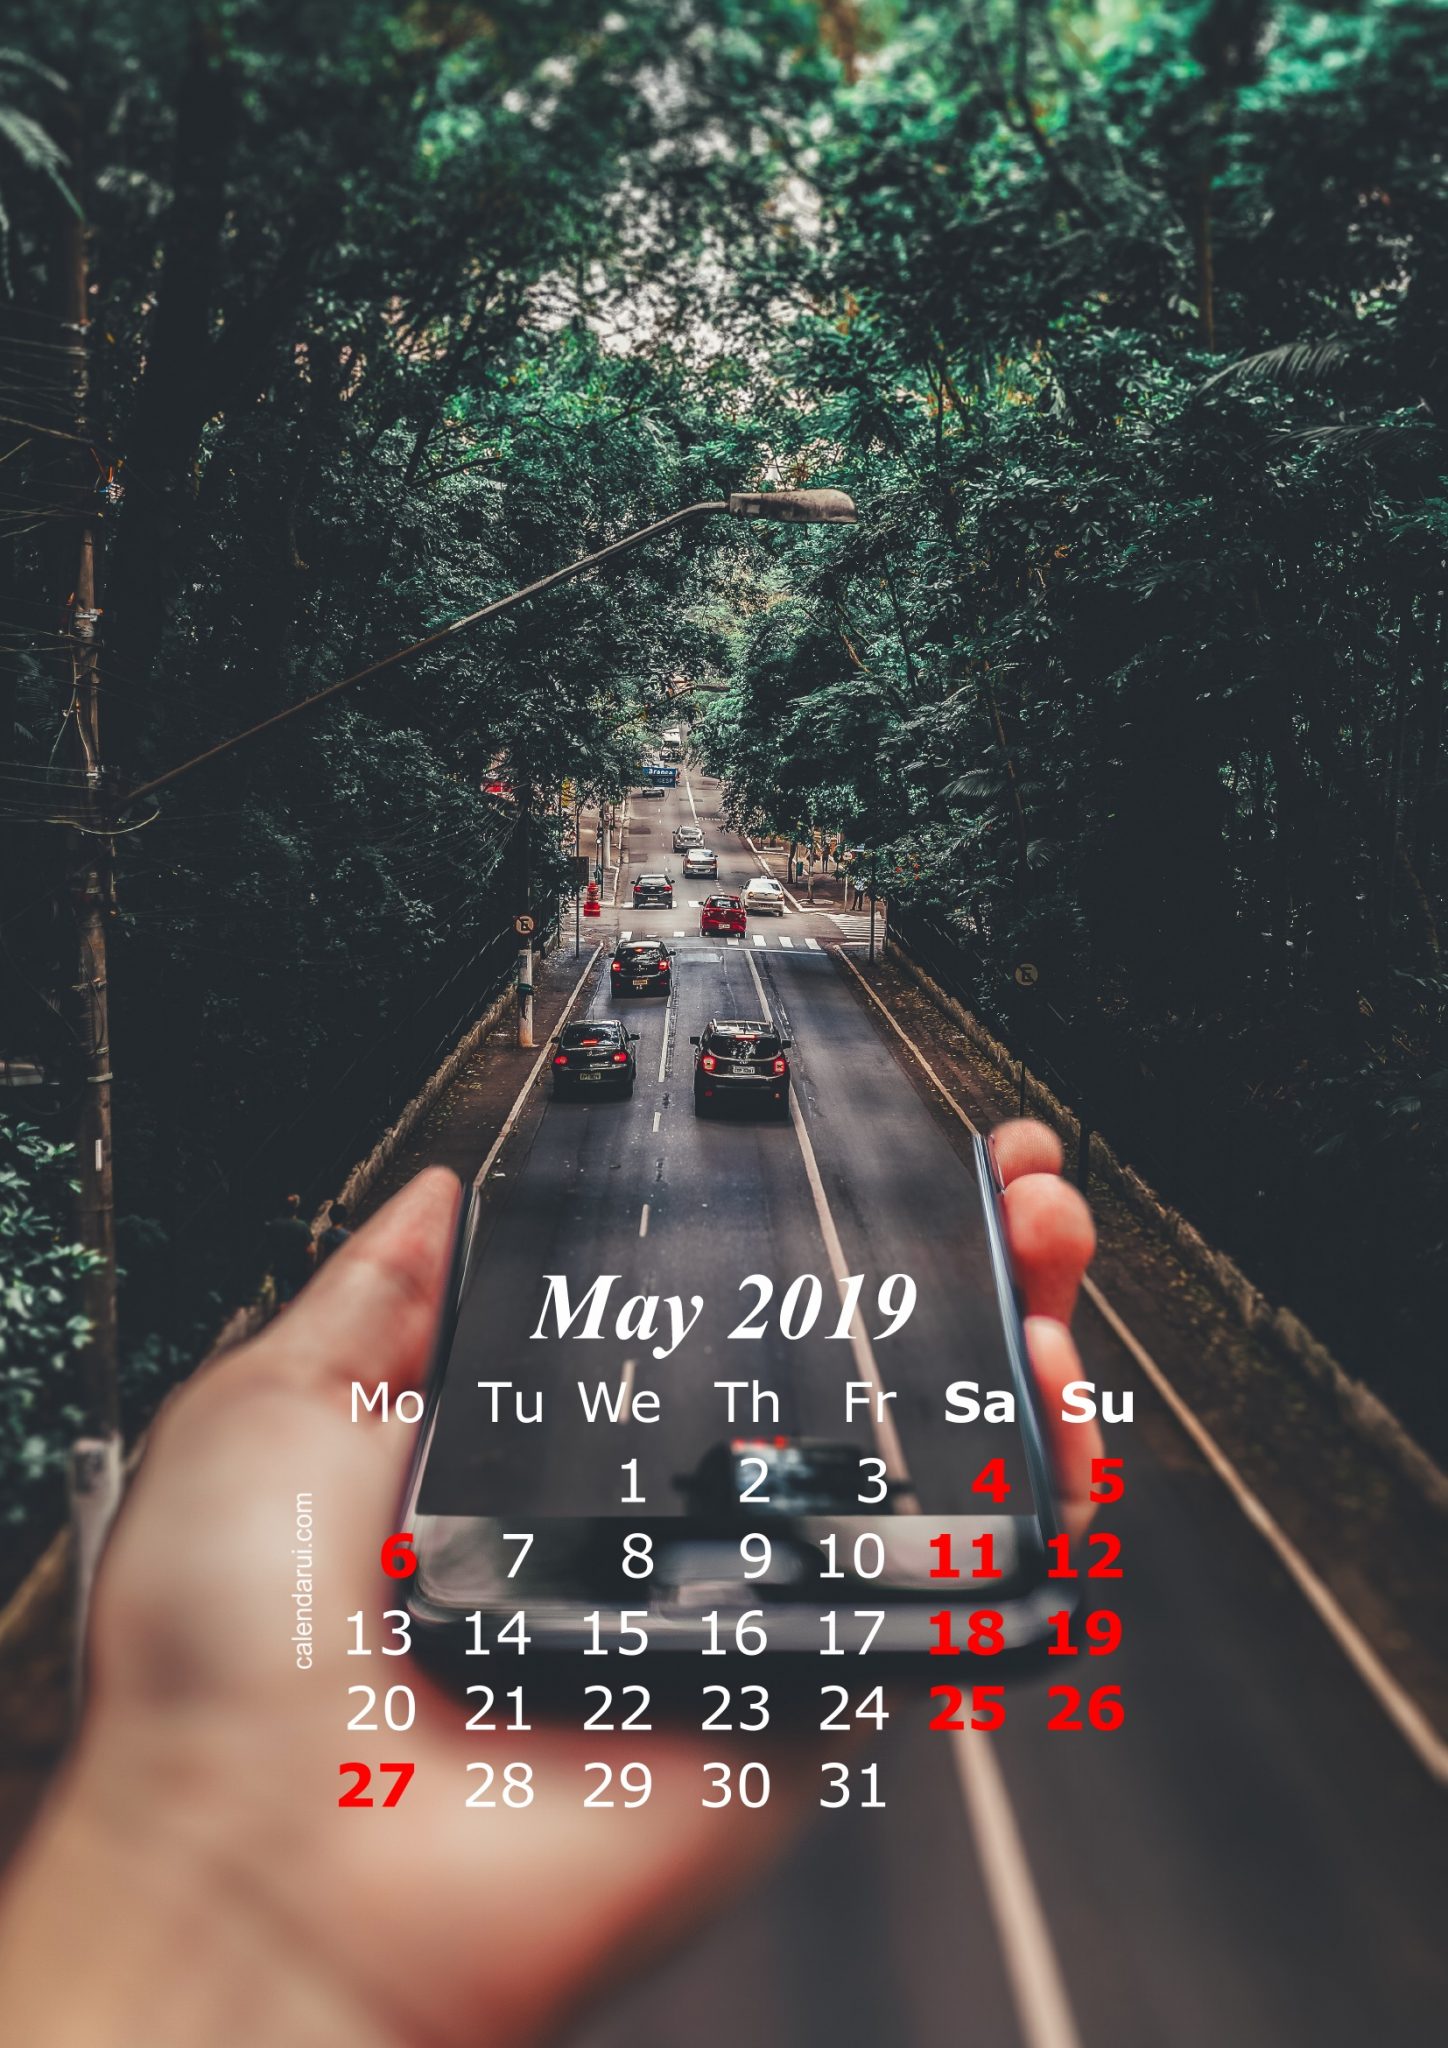 May 2019 Iphone Calendar Hd Wallpaper - New York City Forced Perspective Photography - HD Wallpaper 